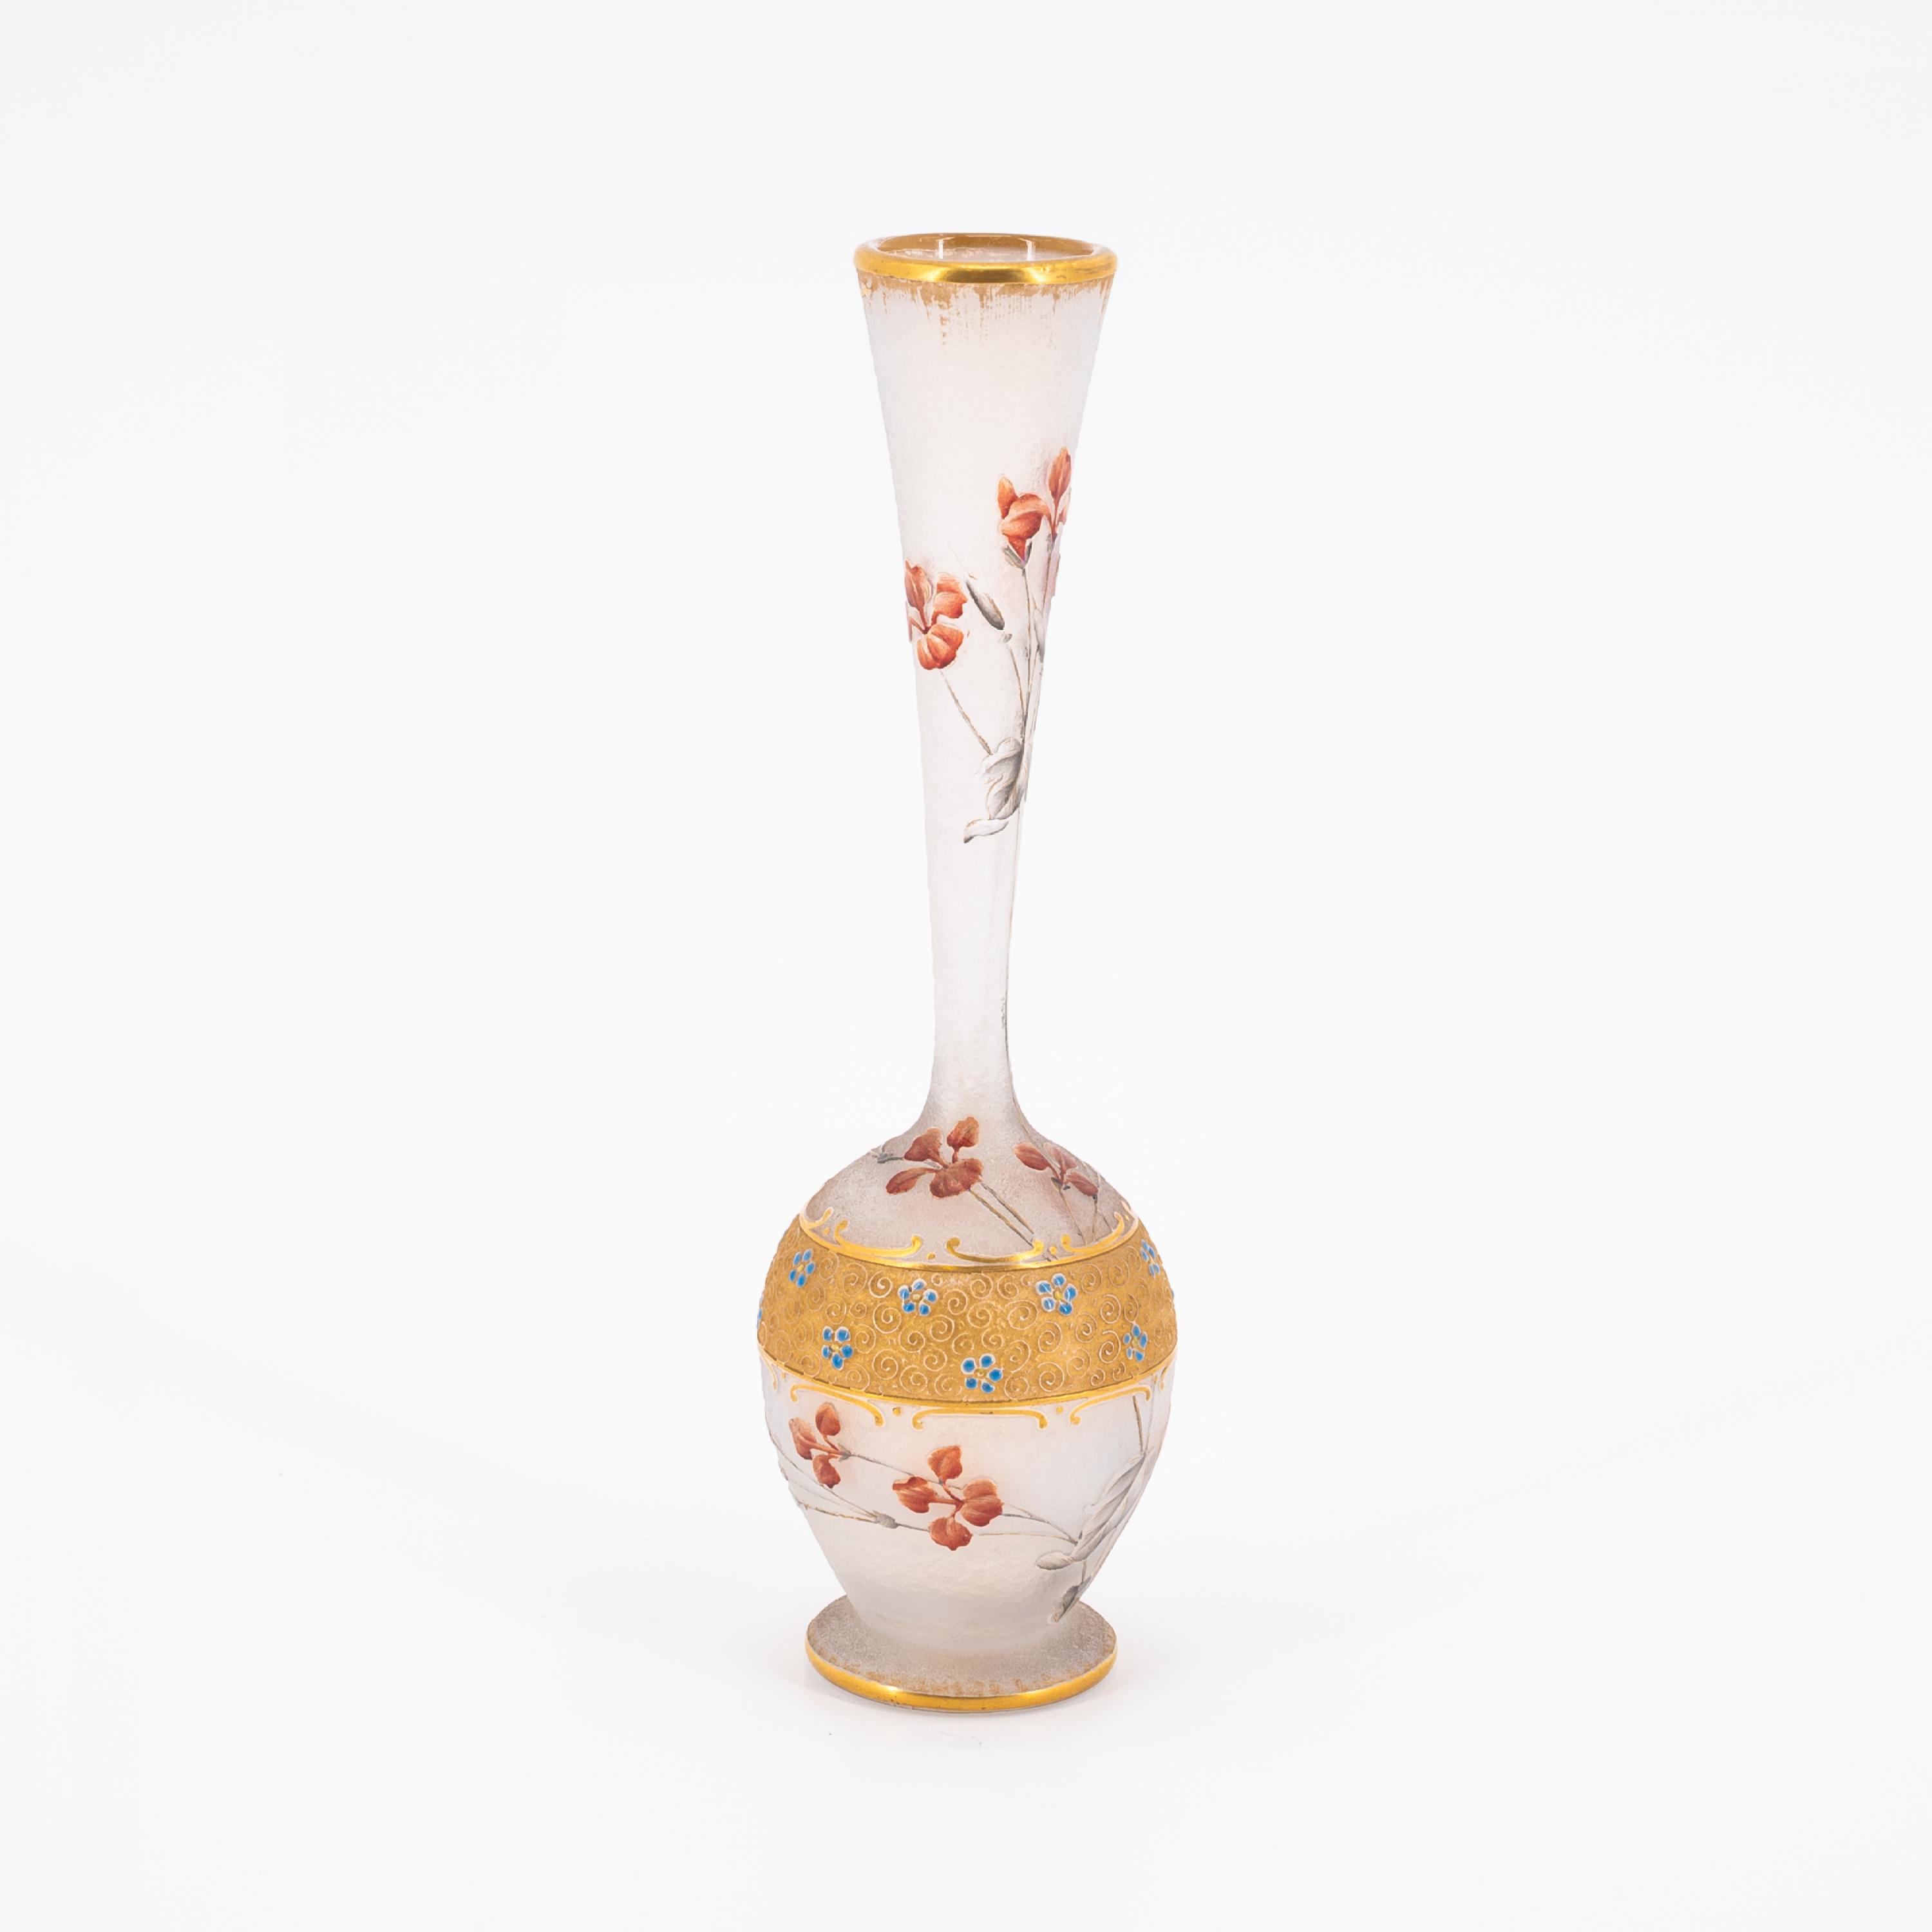 SMALL GLASS VASE WITH GOLD BORDER AND FINE FLORAL PATTERN - Image 4 of 6